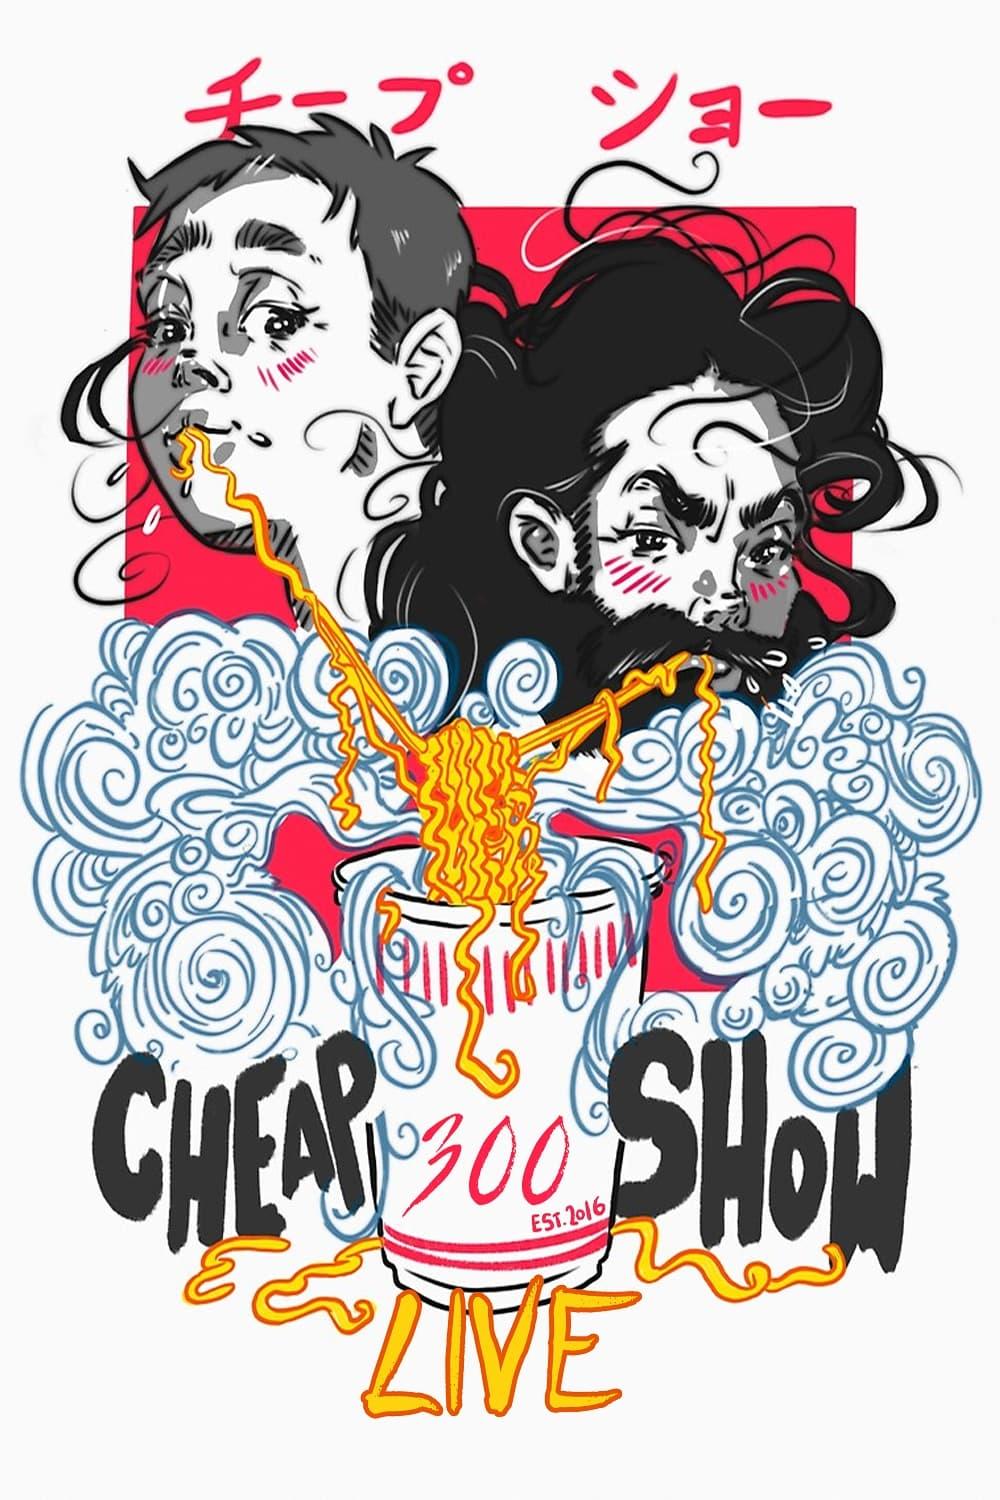 CheapShow 300: Live poster